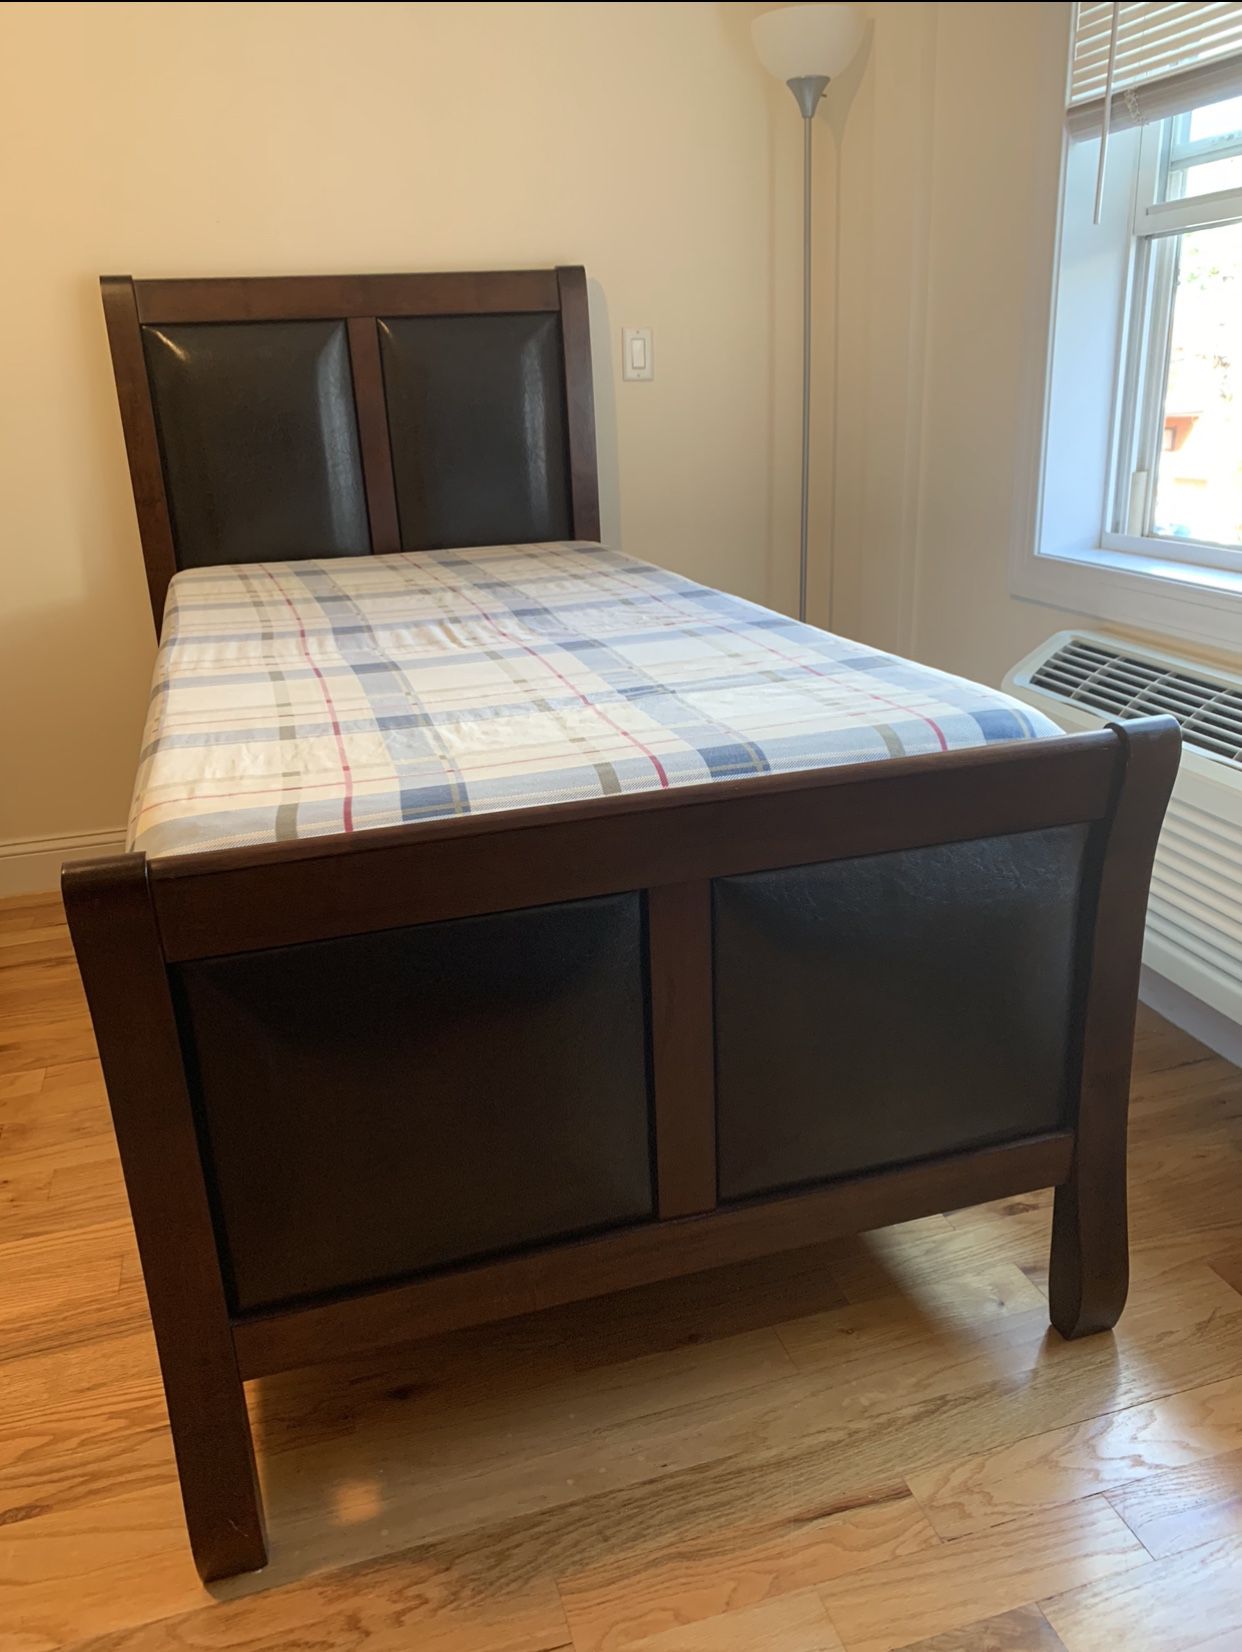 Bed + twin mattress used for 6 months